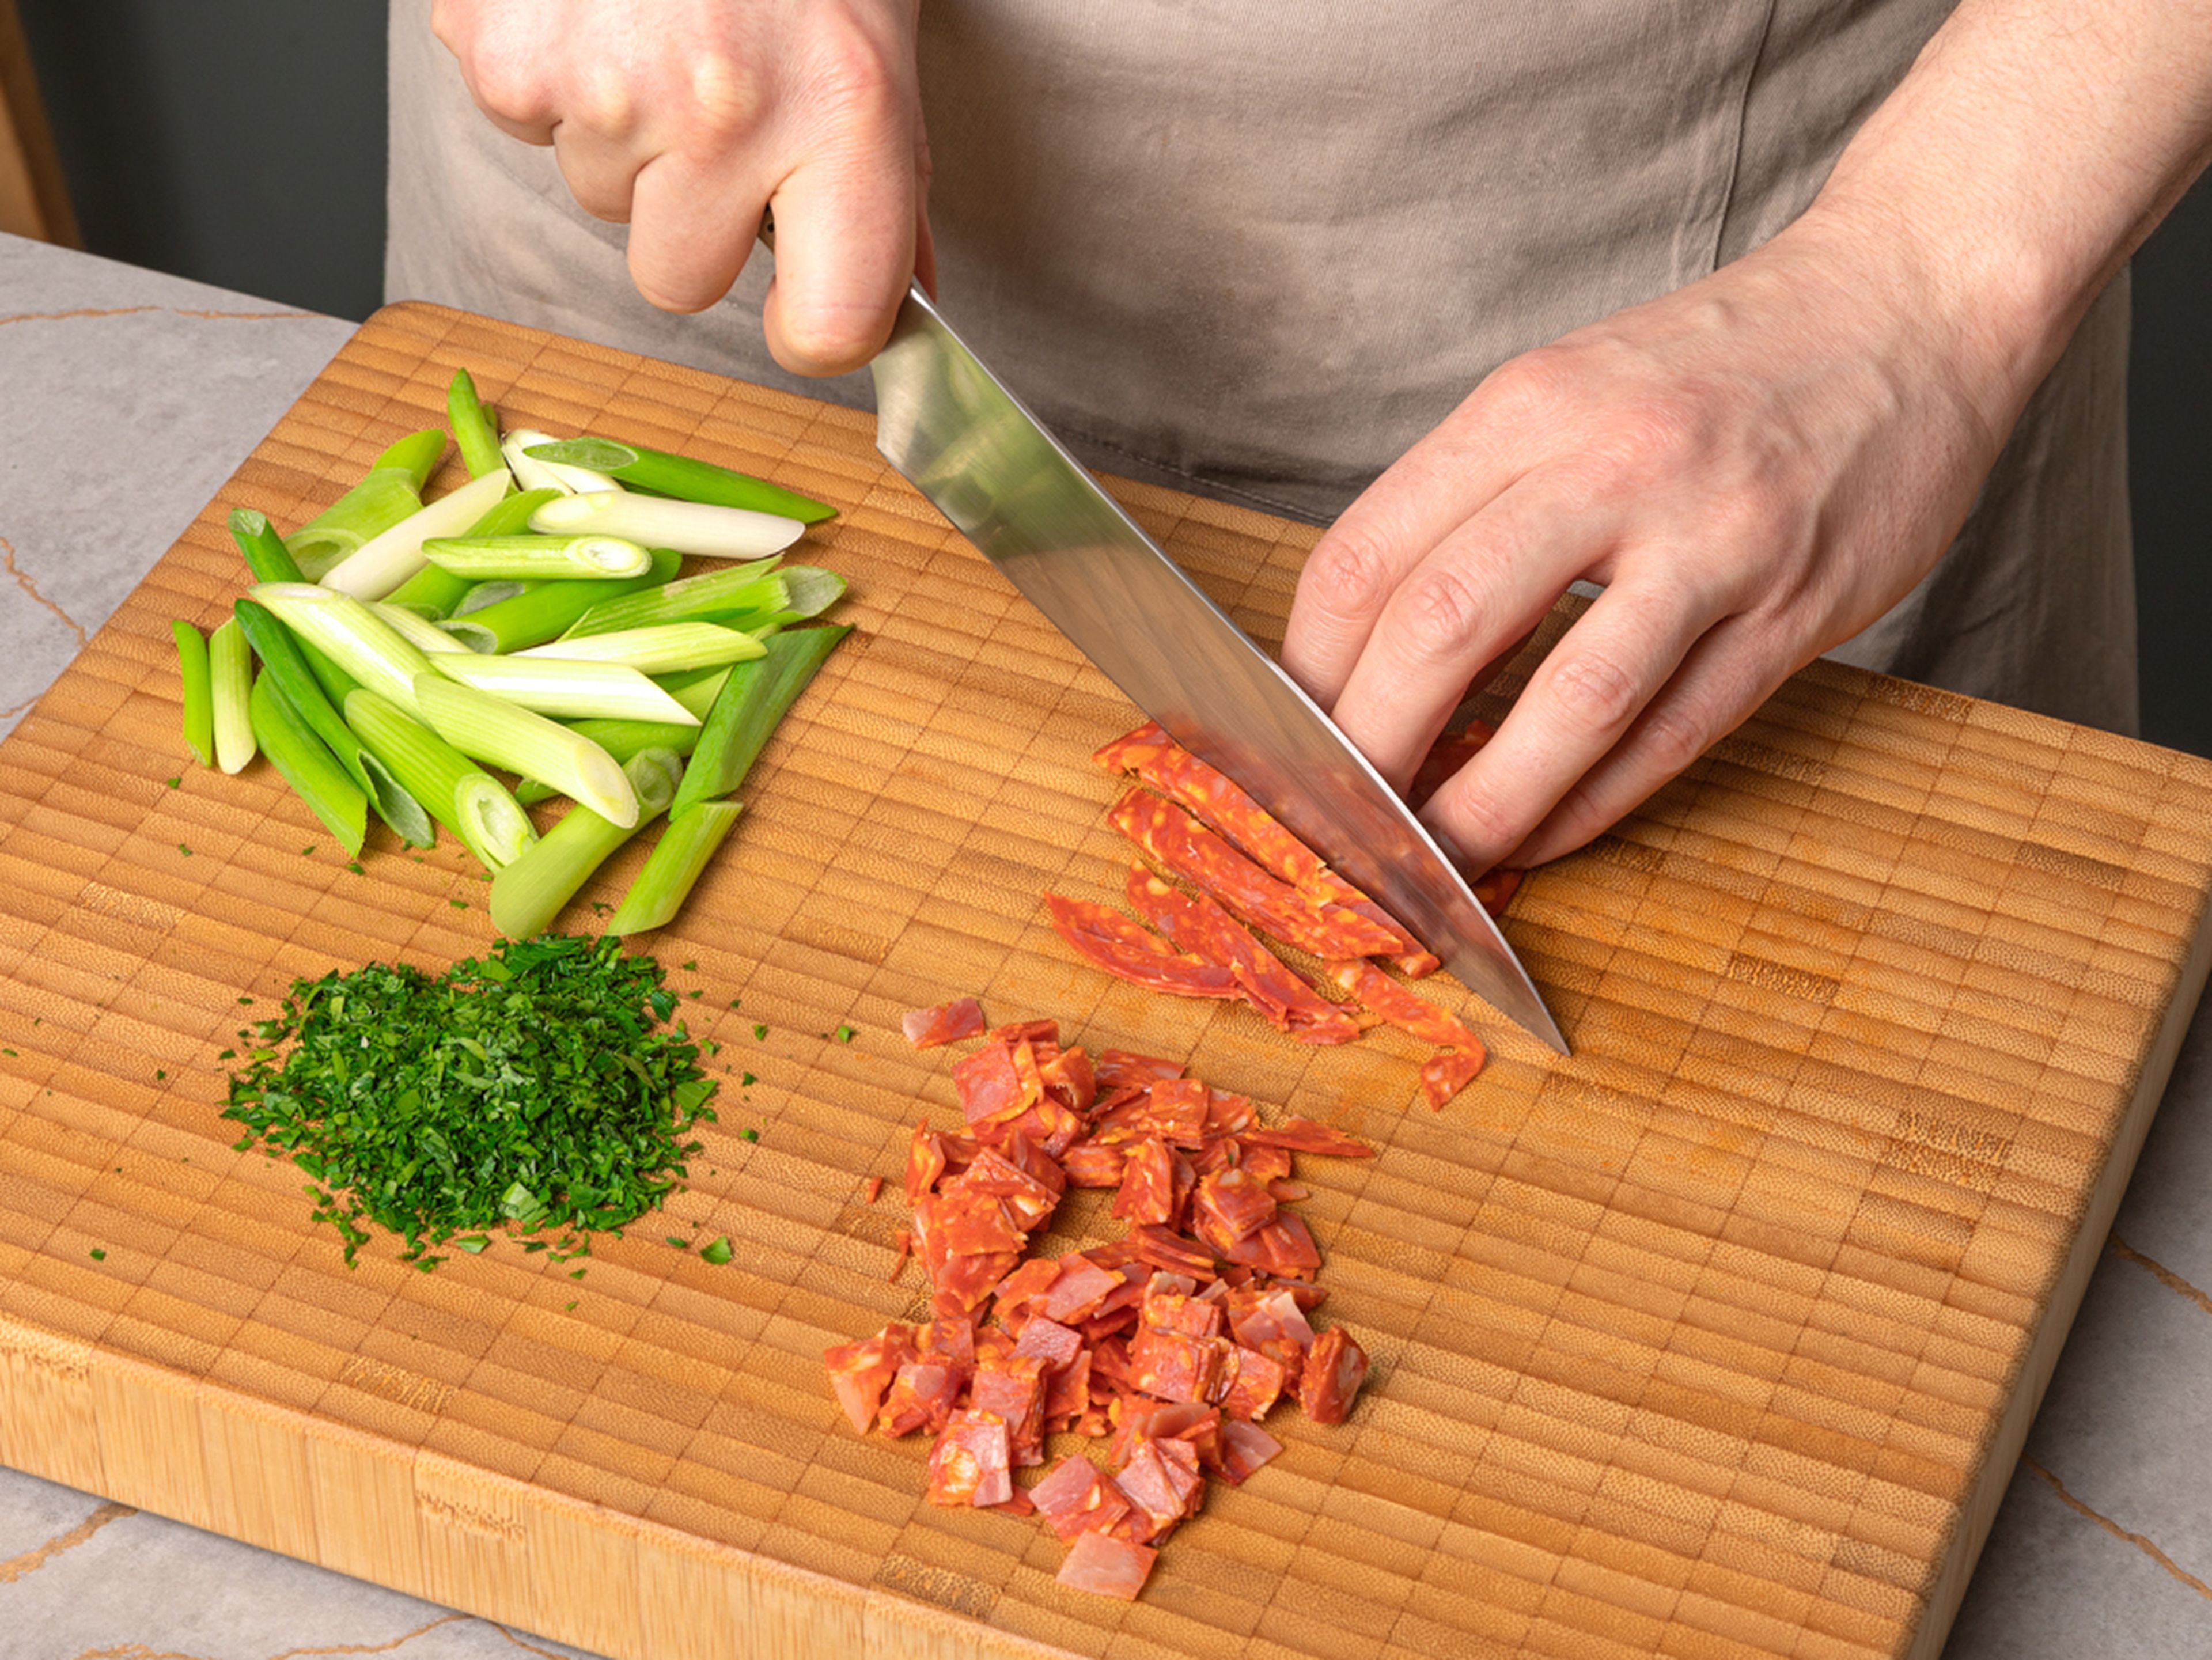 Cut chorizo into small cubes. Cut green onions diagonally into approx. 3 cm / 1 in. long sticks. Finely chop the parsley.